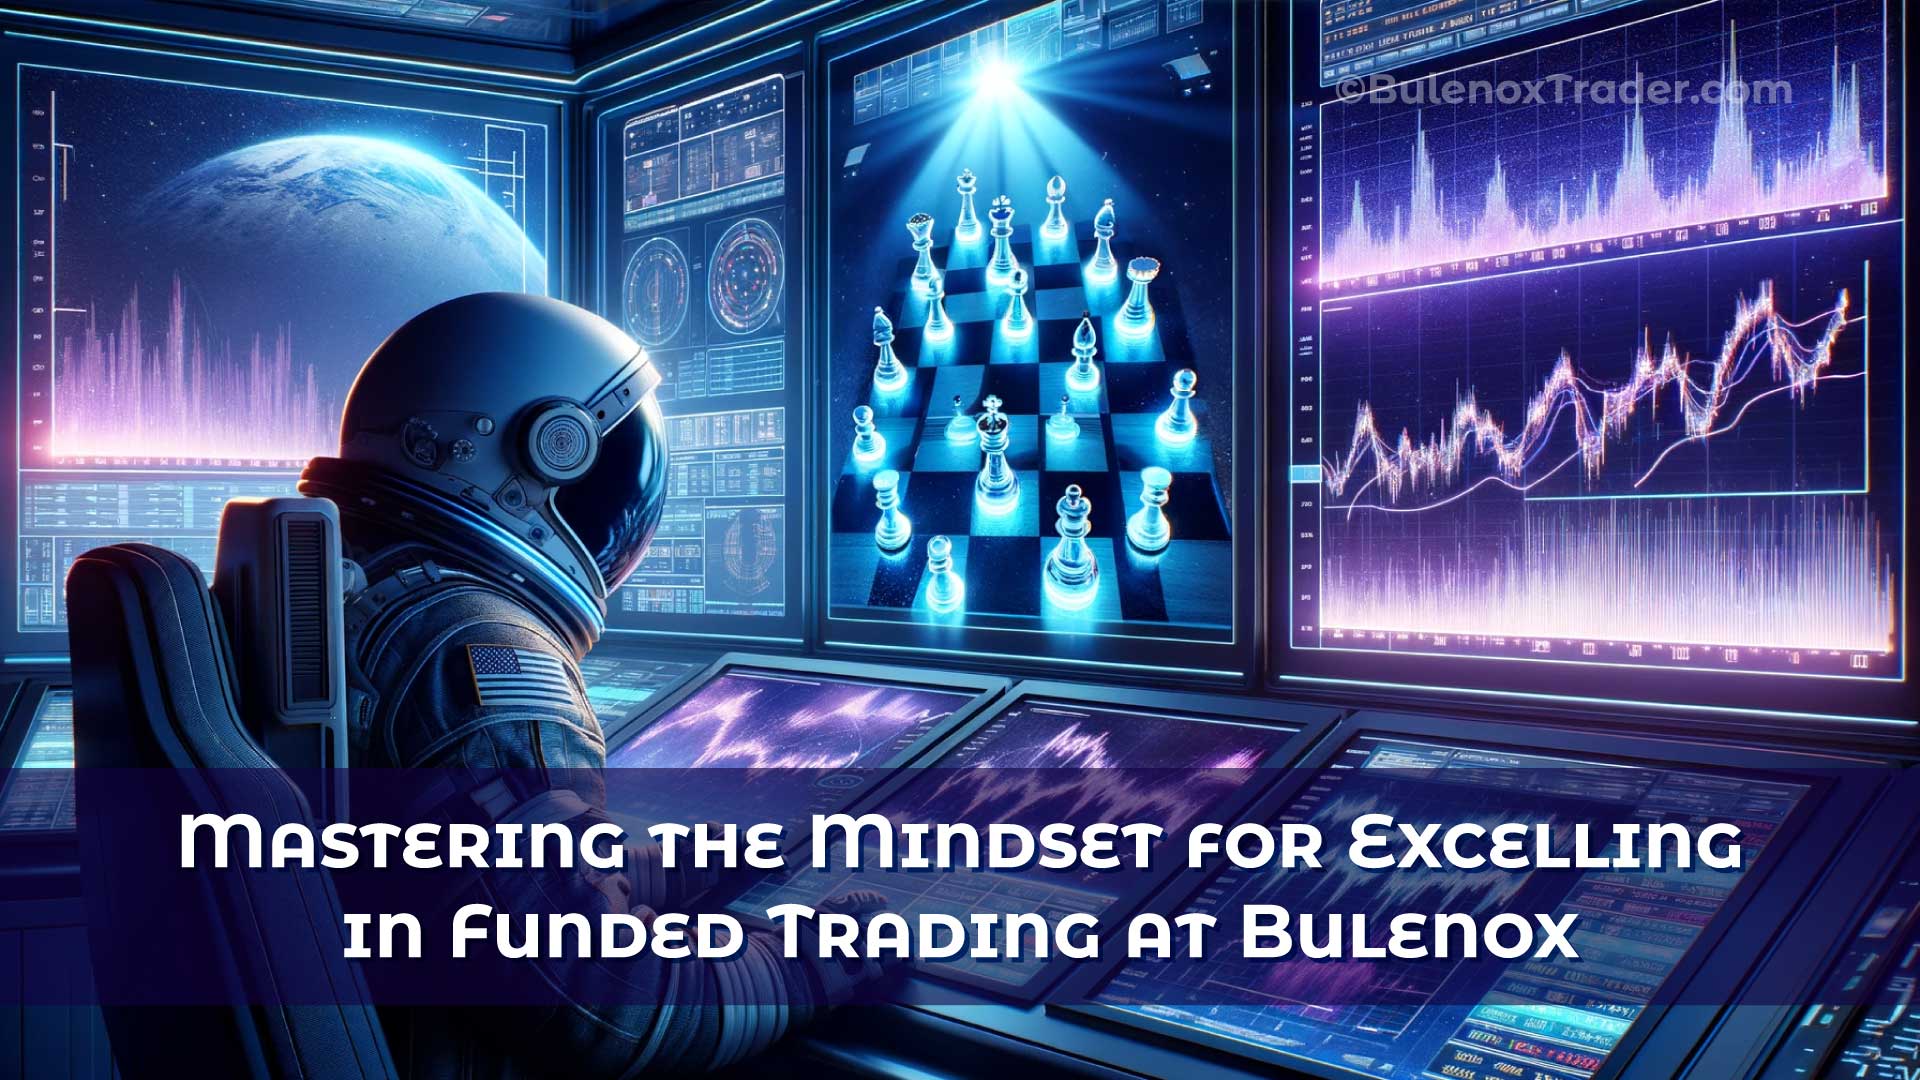 Mastering-the-Mindset-for-Excelling-in-Funded-Trading-at-Bulenox-on-Bulenox-Trader-Website